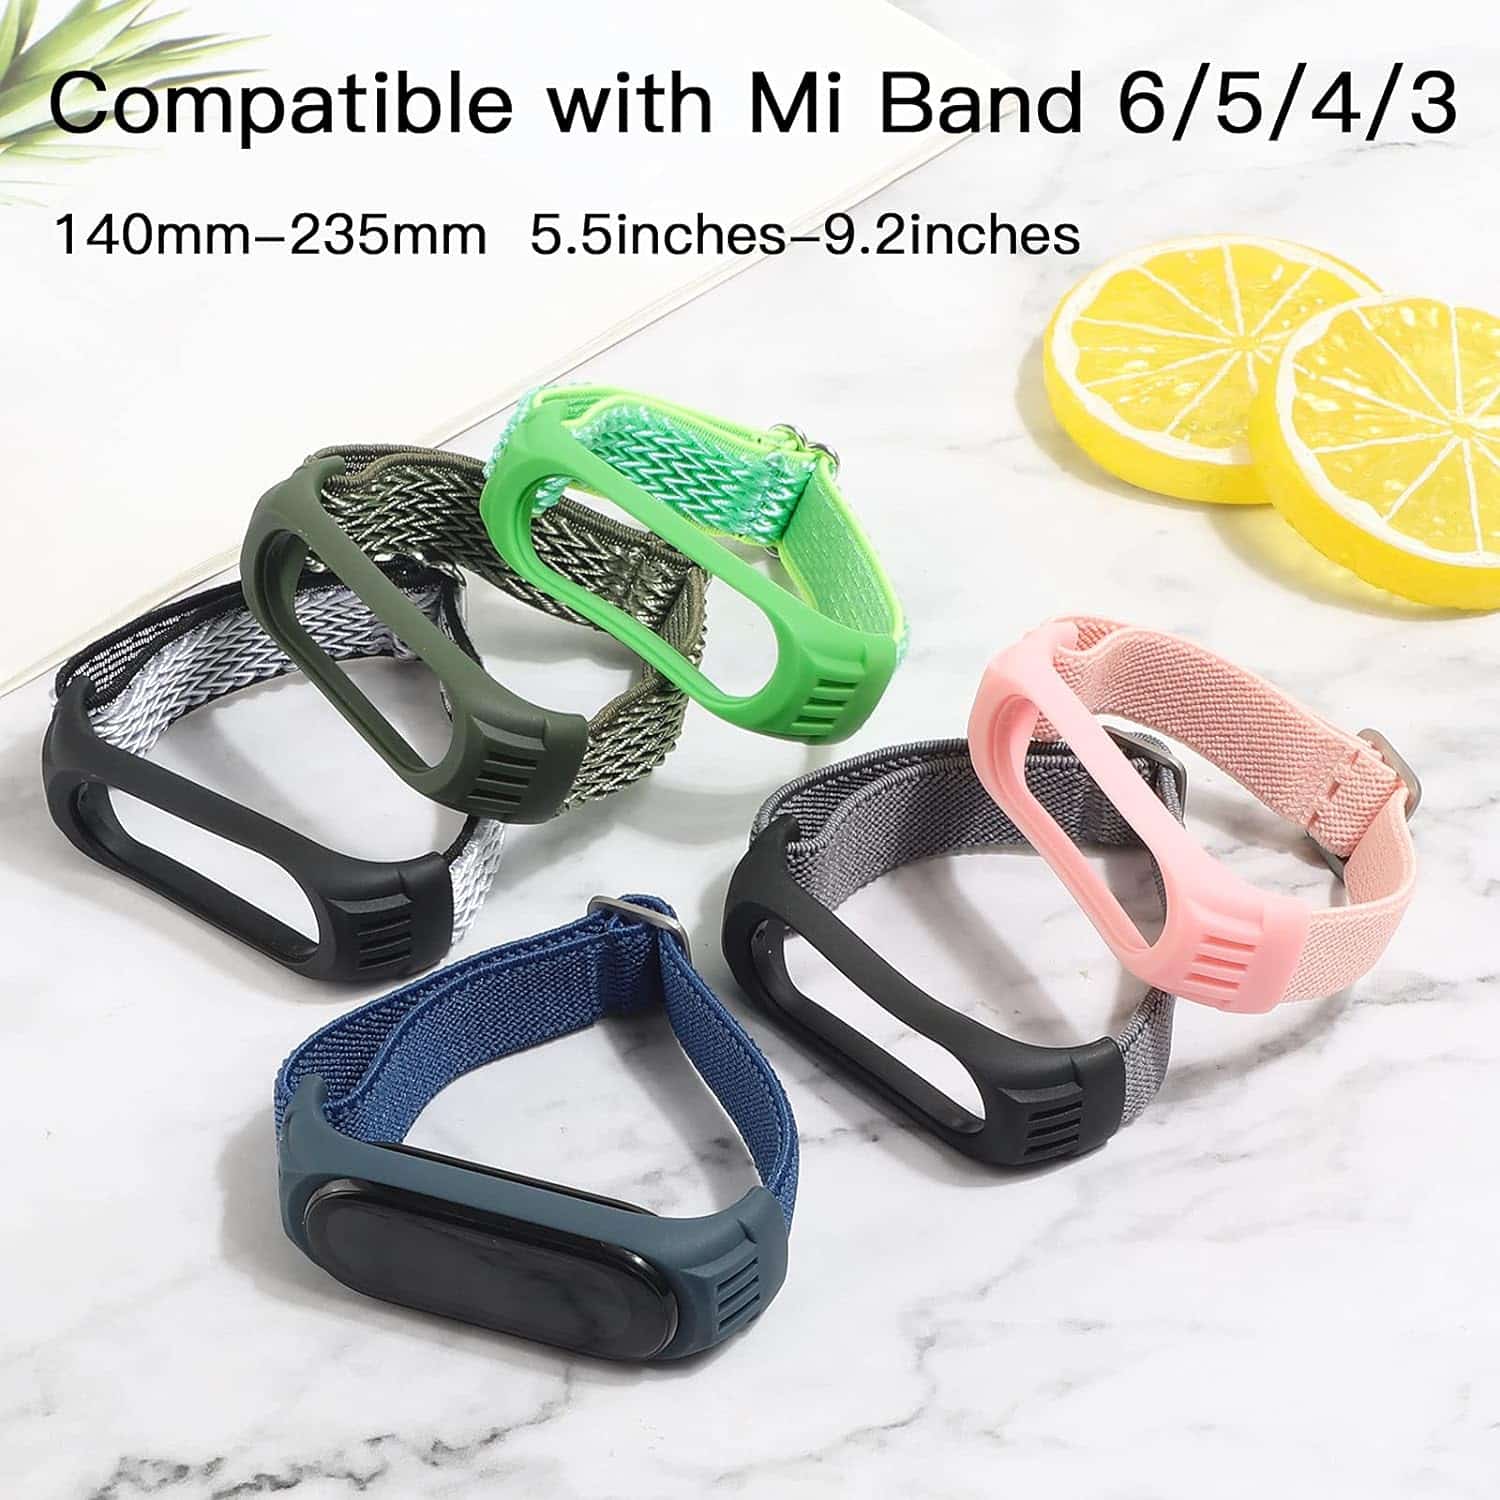 REALSIGN Adjustable Elastic Band: A Must-Have Accessory for Xiaomi MI BAND Users